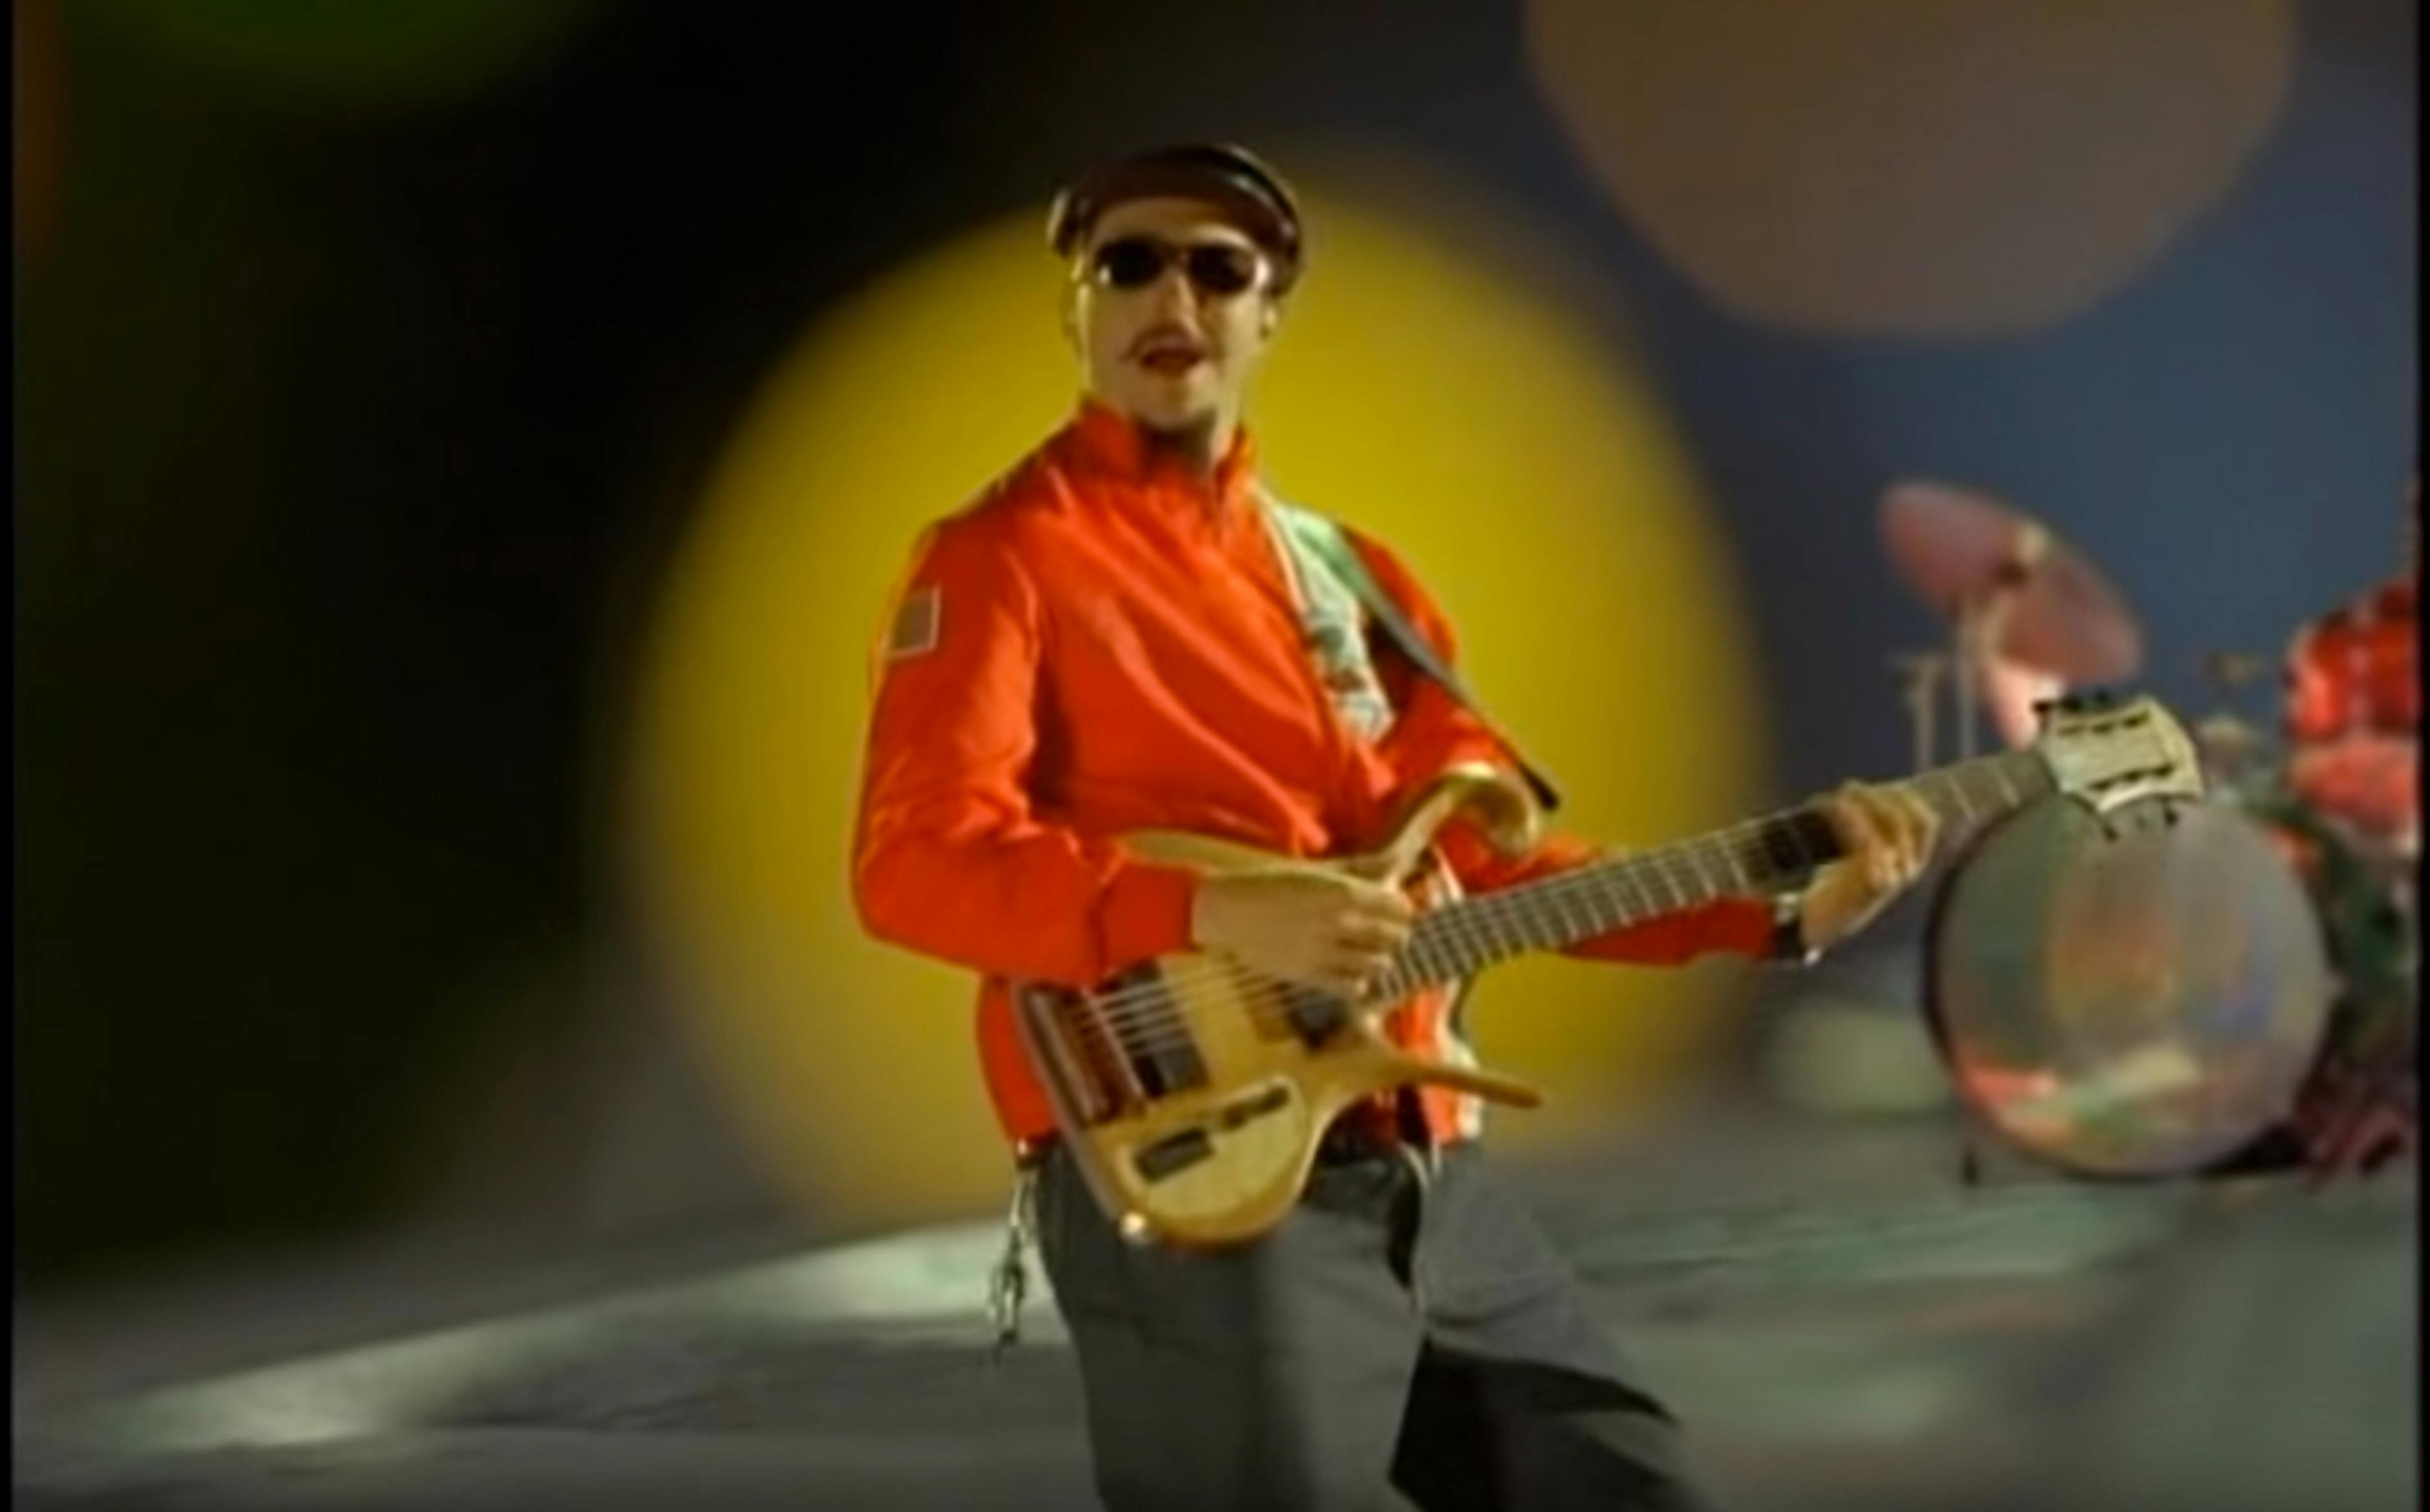 A Deep Dive Into The Video For Primus' Shake Hands With Beef